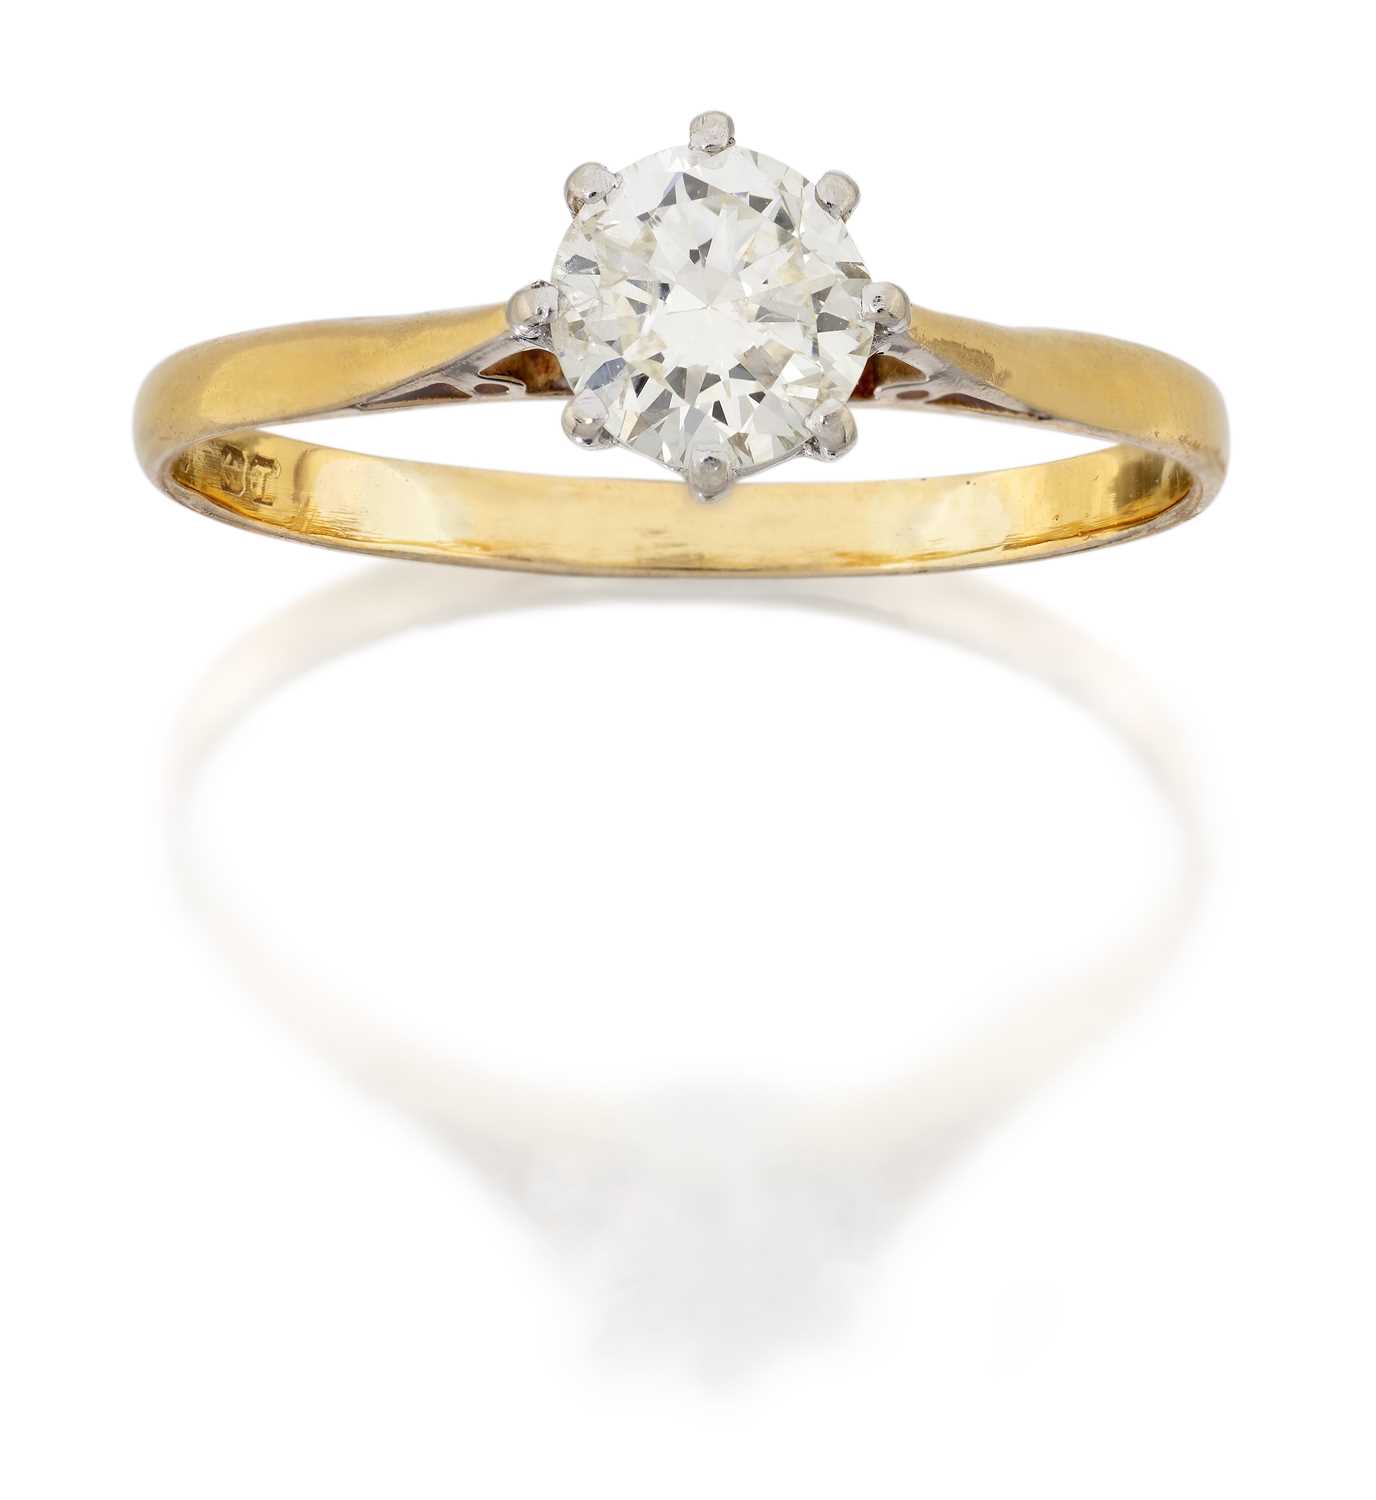 Lot 2115 - An 18 Carat Gold Diamond Solitaire Ring